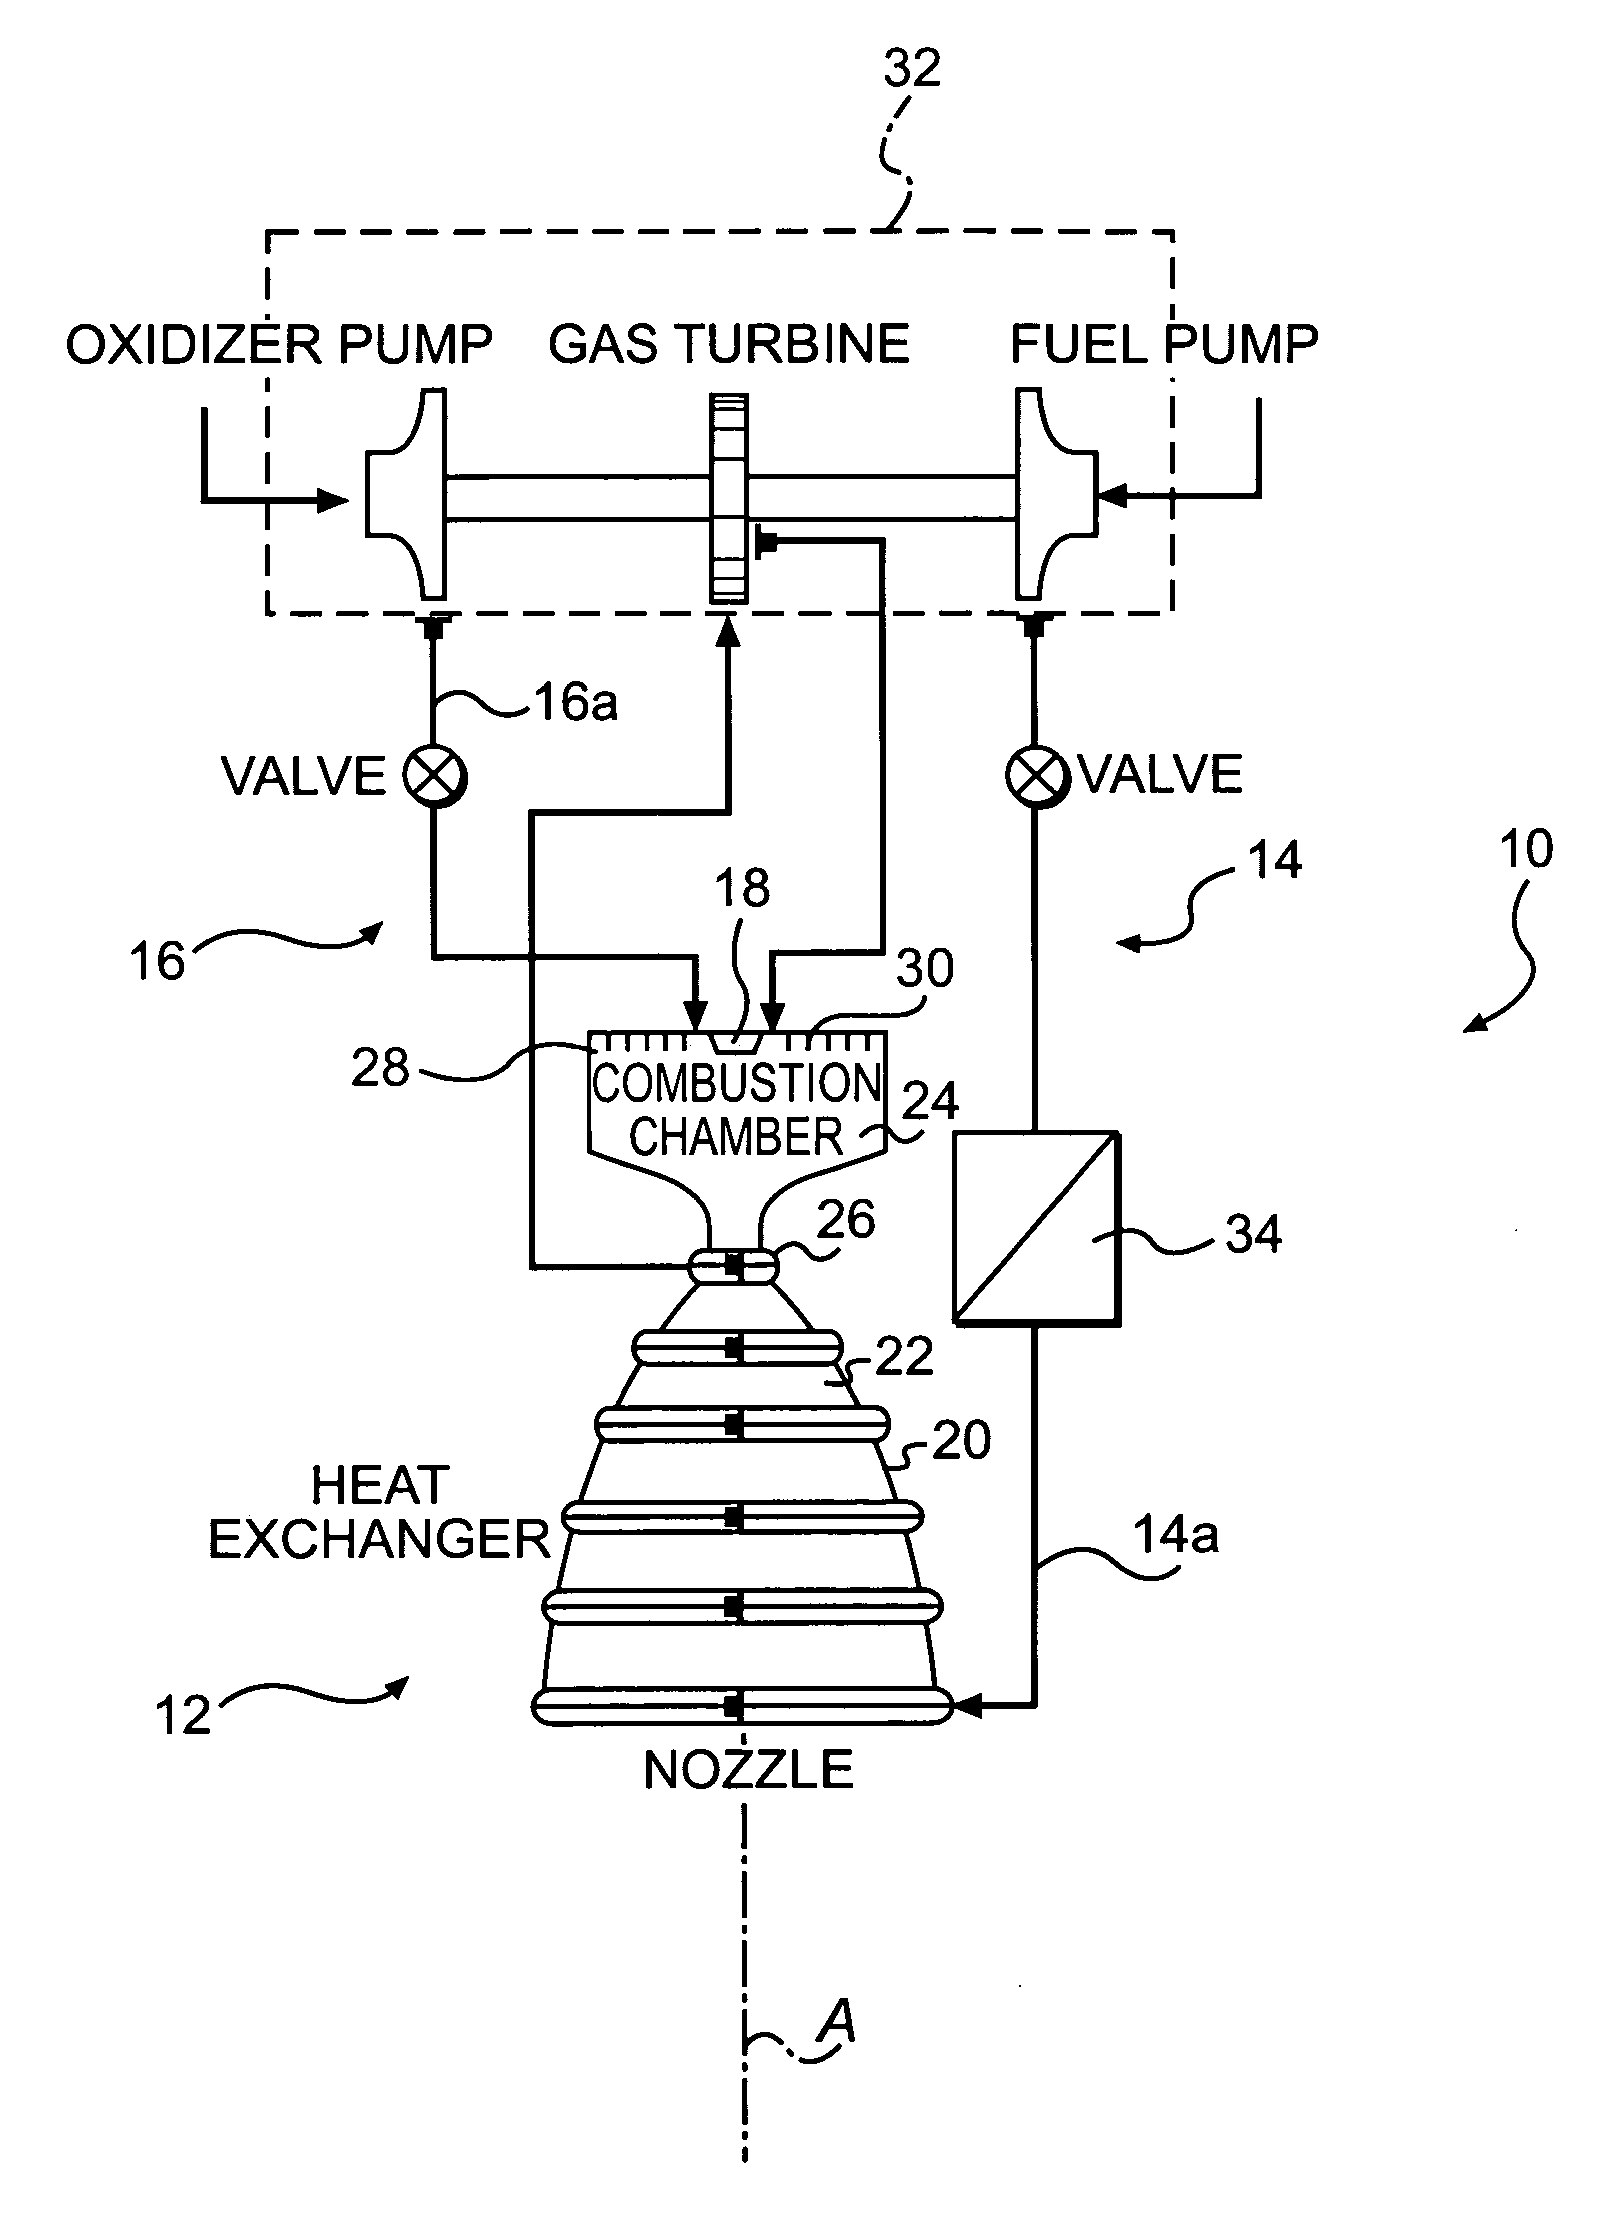 System and method for cooling hydrocarbon-fueled rocket engines